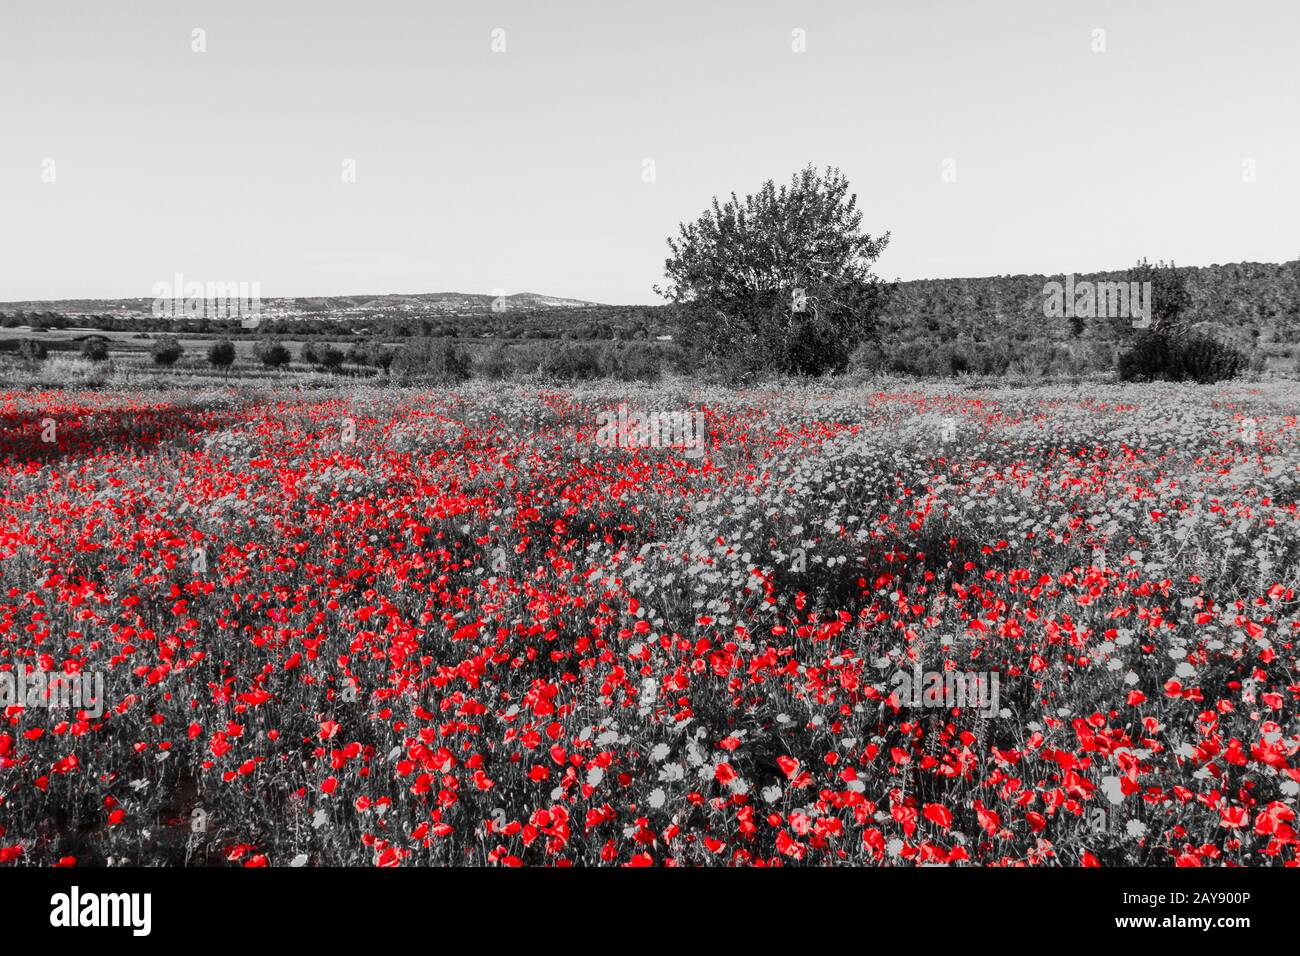 Field filled with Red Poppies and Daisies with Trees in the background on spring day in Cyprus rendered in red and black and whi Stock Photo